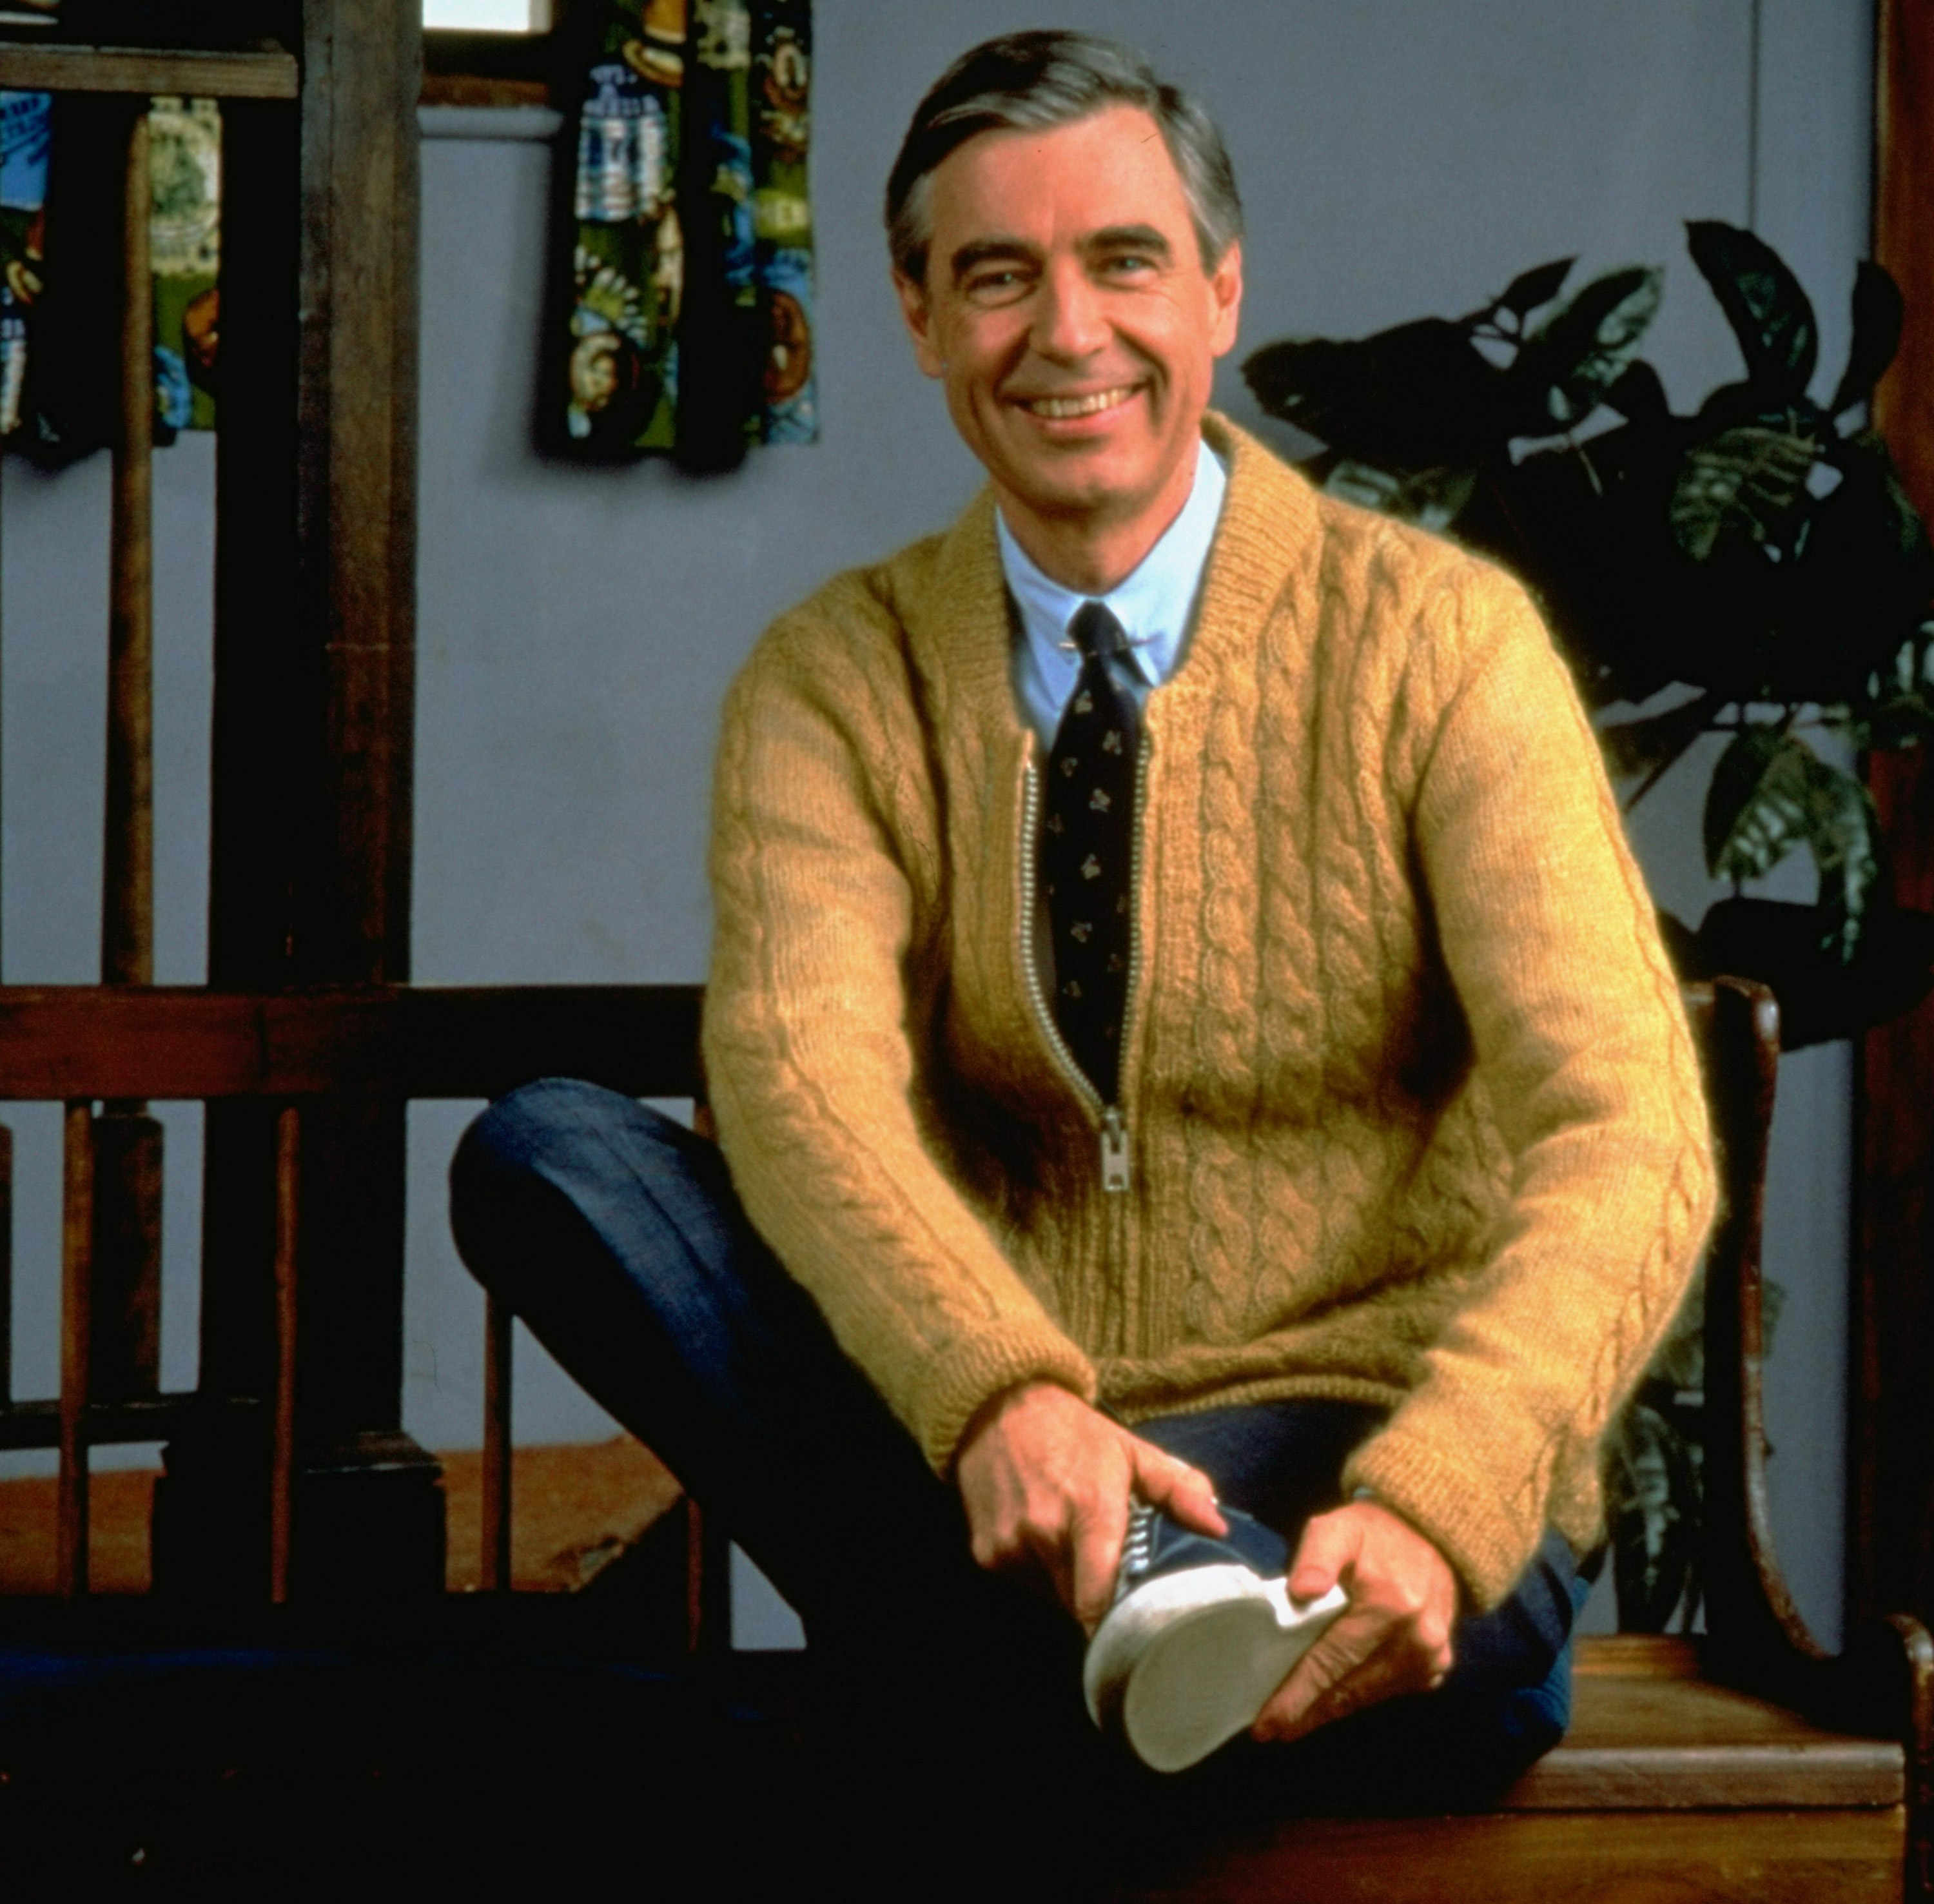 Not me but my dads story. My dad interviewed Mr. Rogers and Mr. Rogers was very nice, but the highlight of the interview was Mr. Rogers saying he was proud of my dad. Great guy